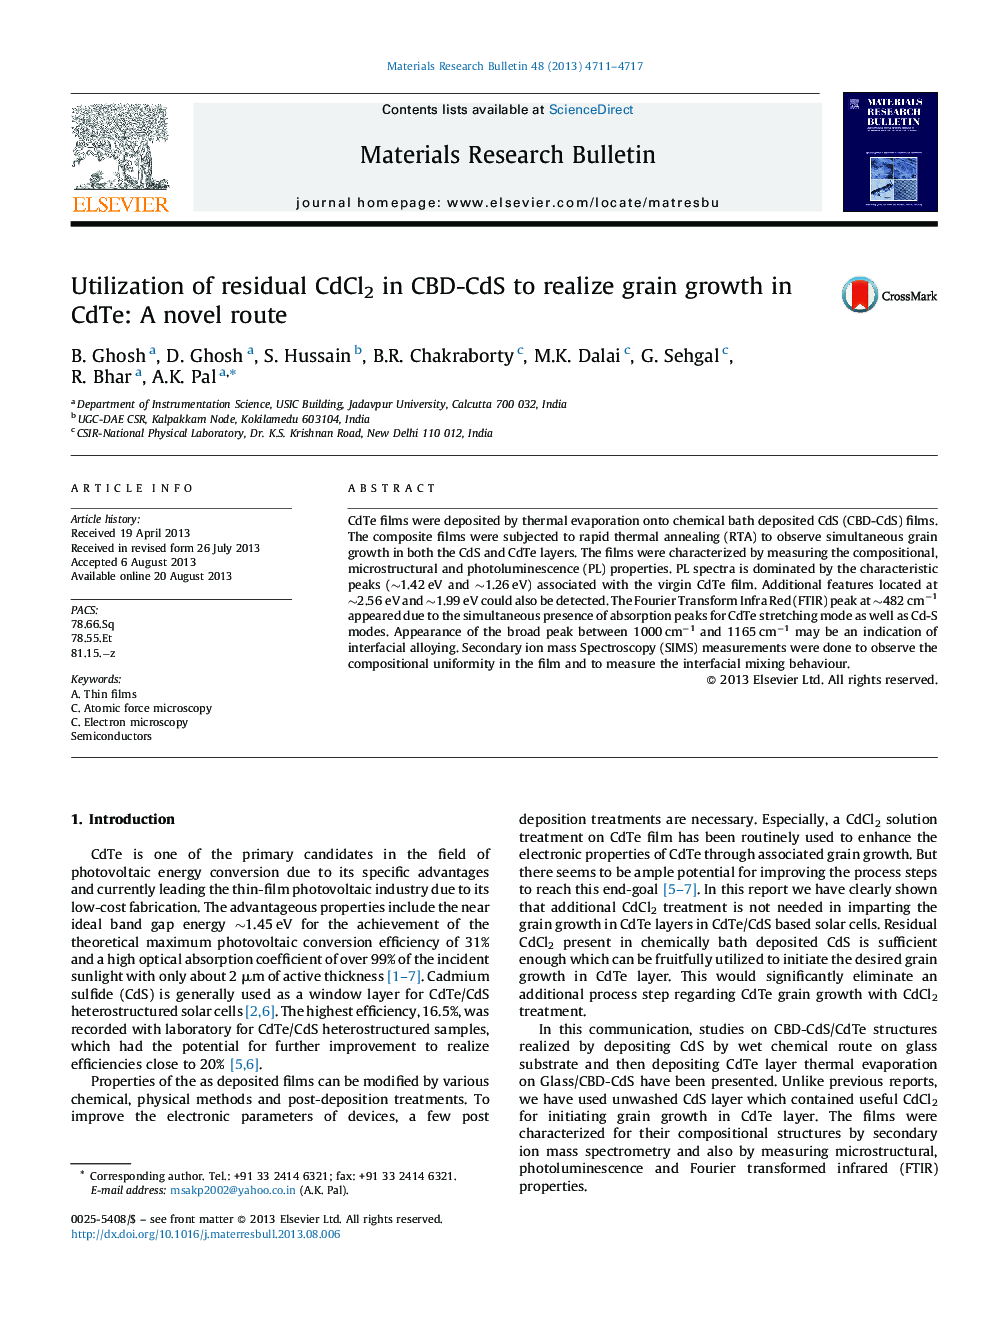 Utilization of residual CdCl2 in CBD-CdS to realize grain growth in CdTe: A novel route